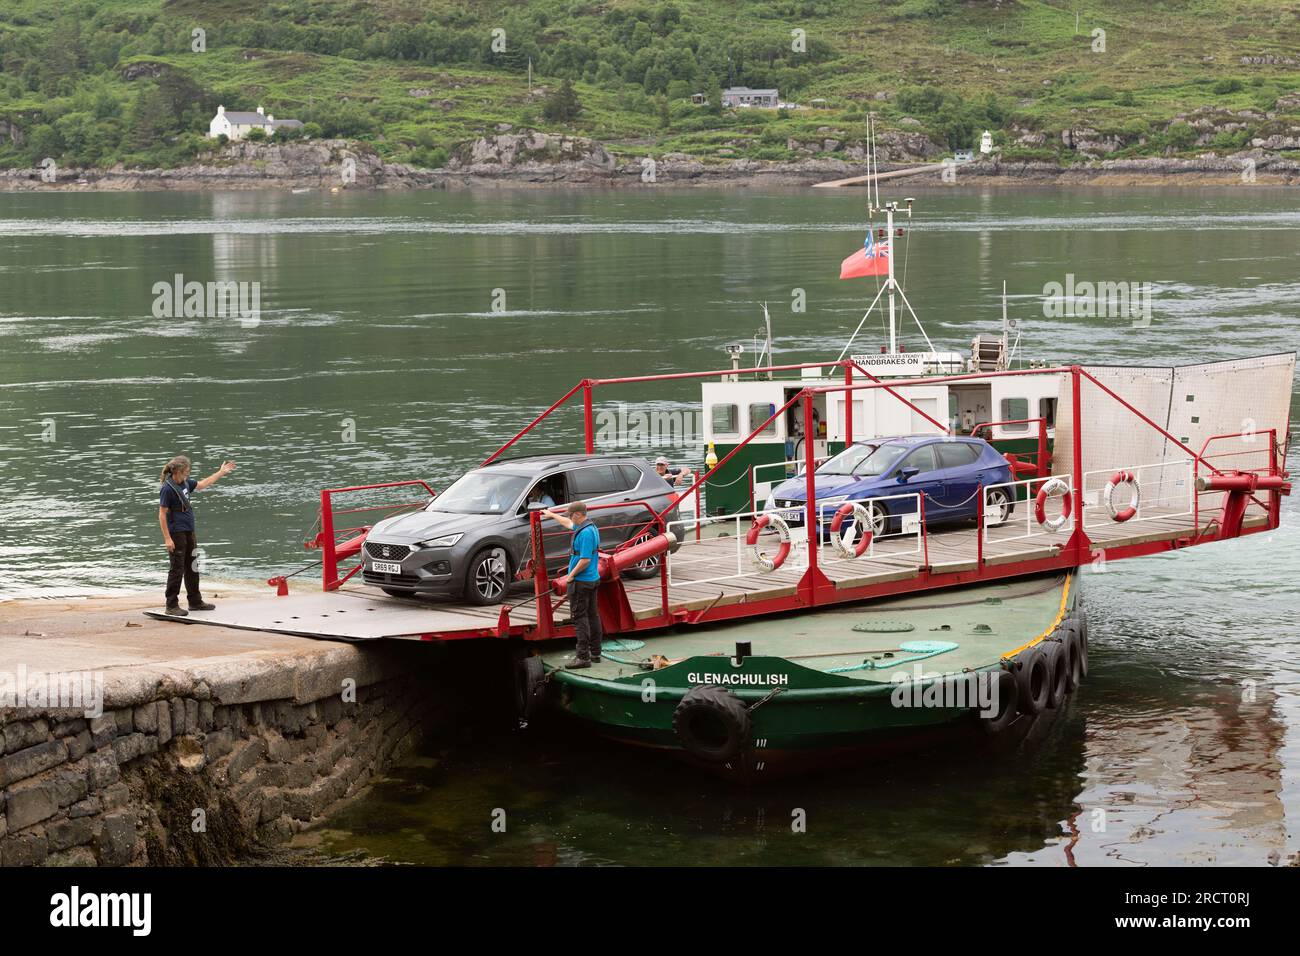 Under the Guidance of the Deckhands, Cars Disembark from the MV Glenachulish, a Manually Operated Turntable Ferry, at Kylerhea on the Isle of Skye. Stock Photo